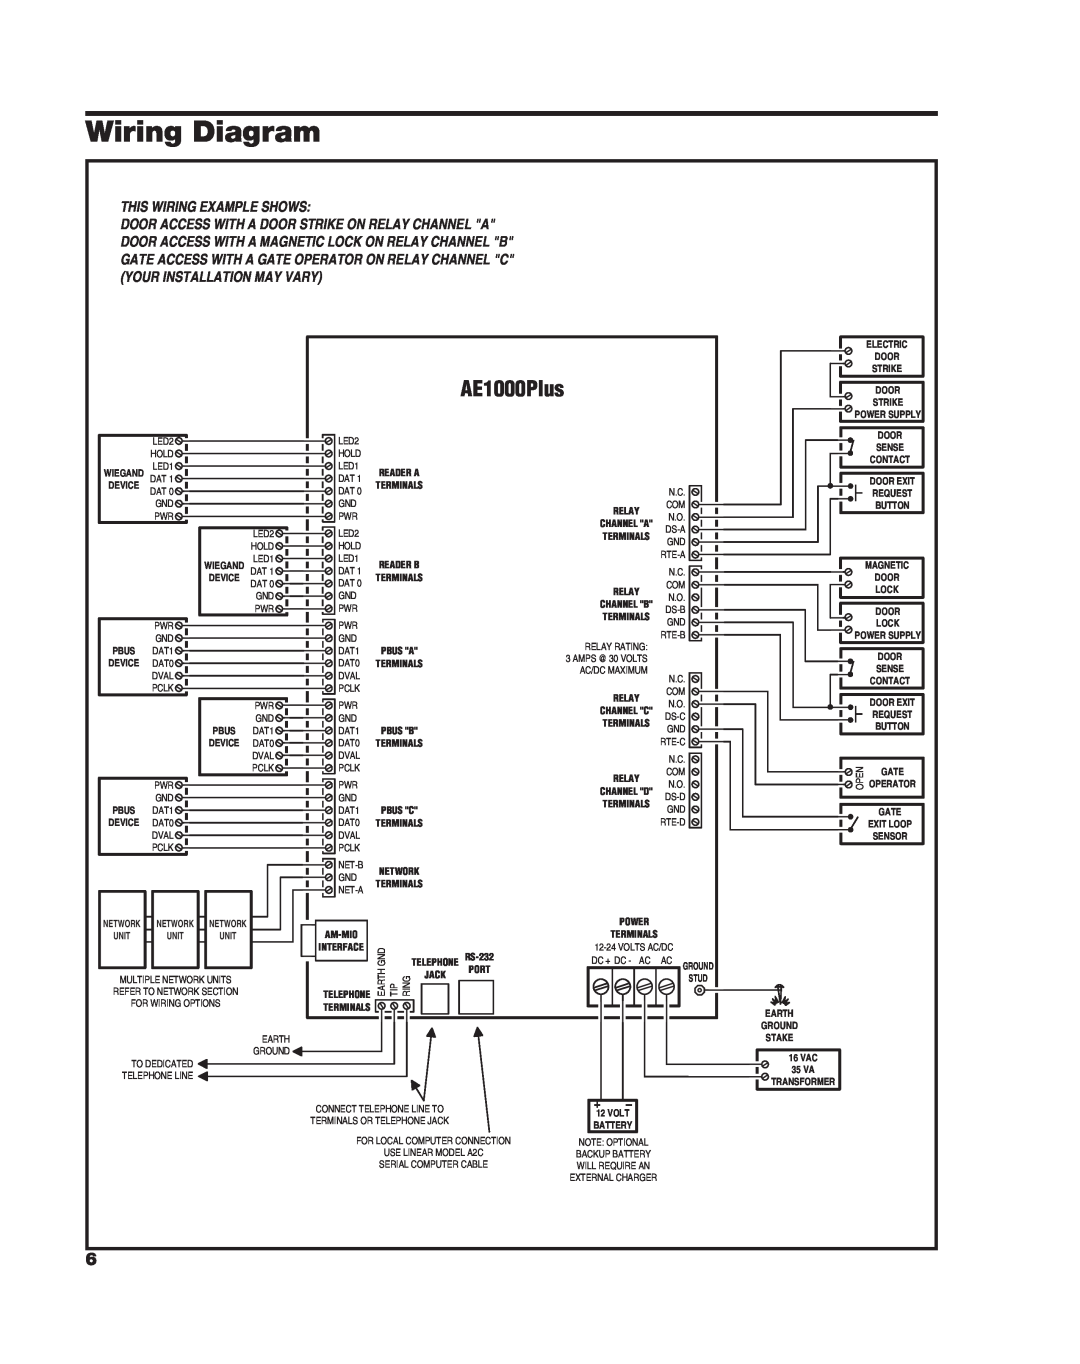 Linear AE1000Plus installation instructions Wiring Diagram, This Wiring Example Shows 